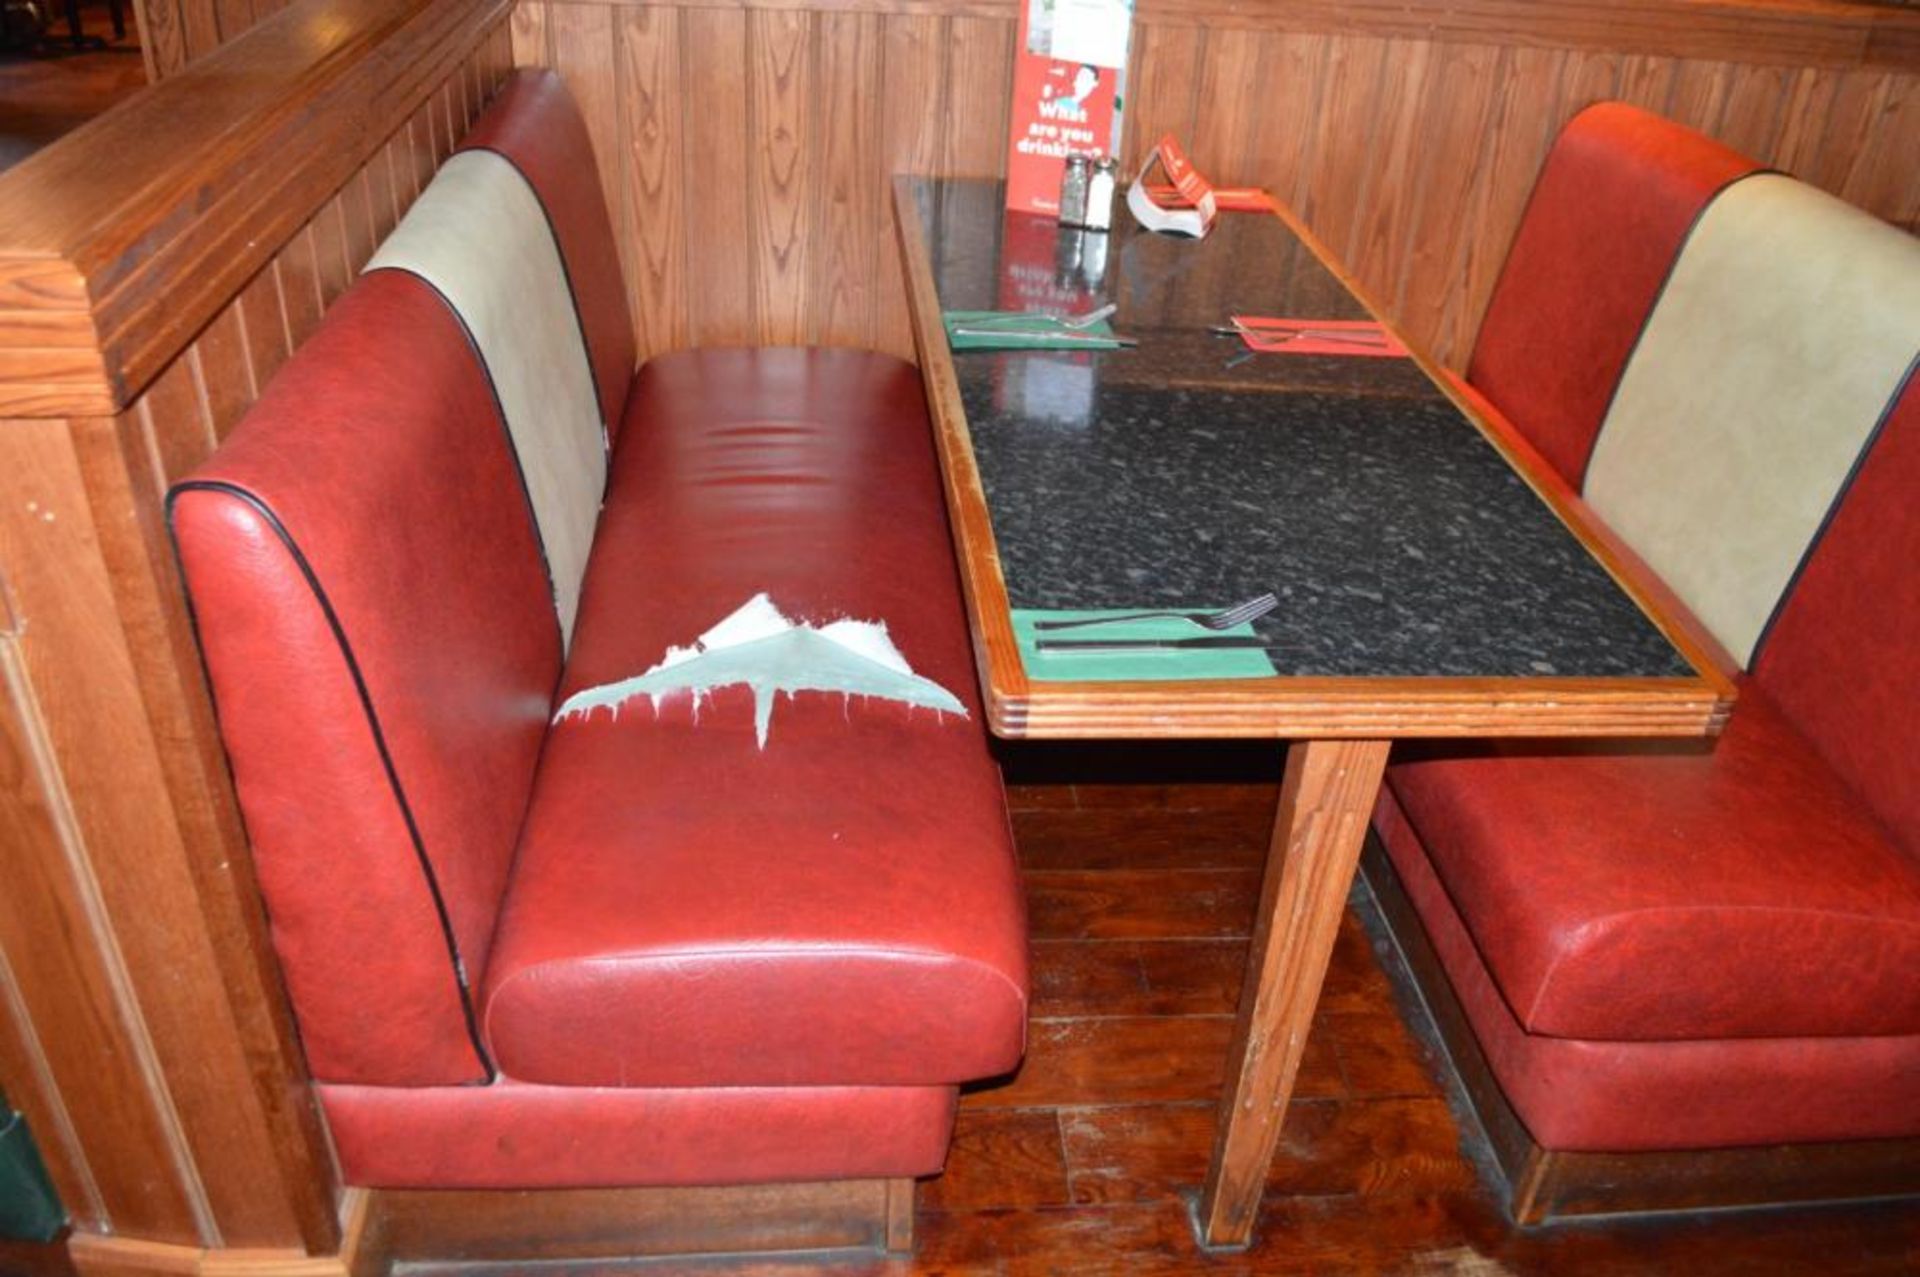 1 x Selection of Cosy Bespoke Seating Booths in a 1950's Retro American Diner Design With Dining Tab - Image 29 of 30